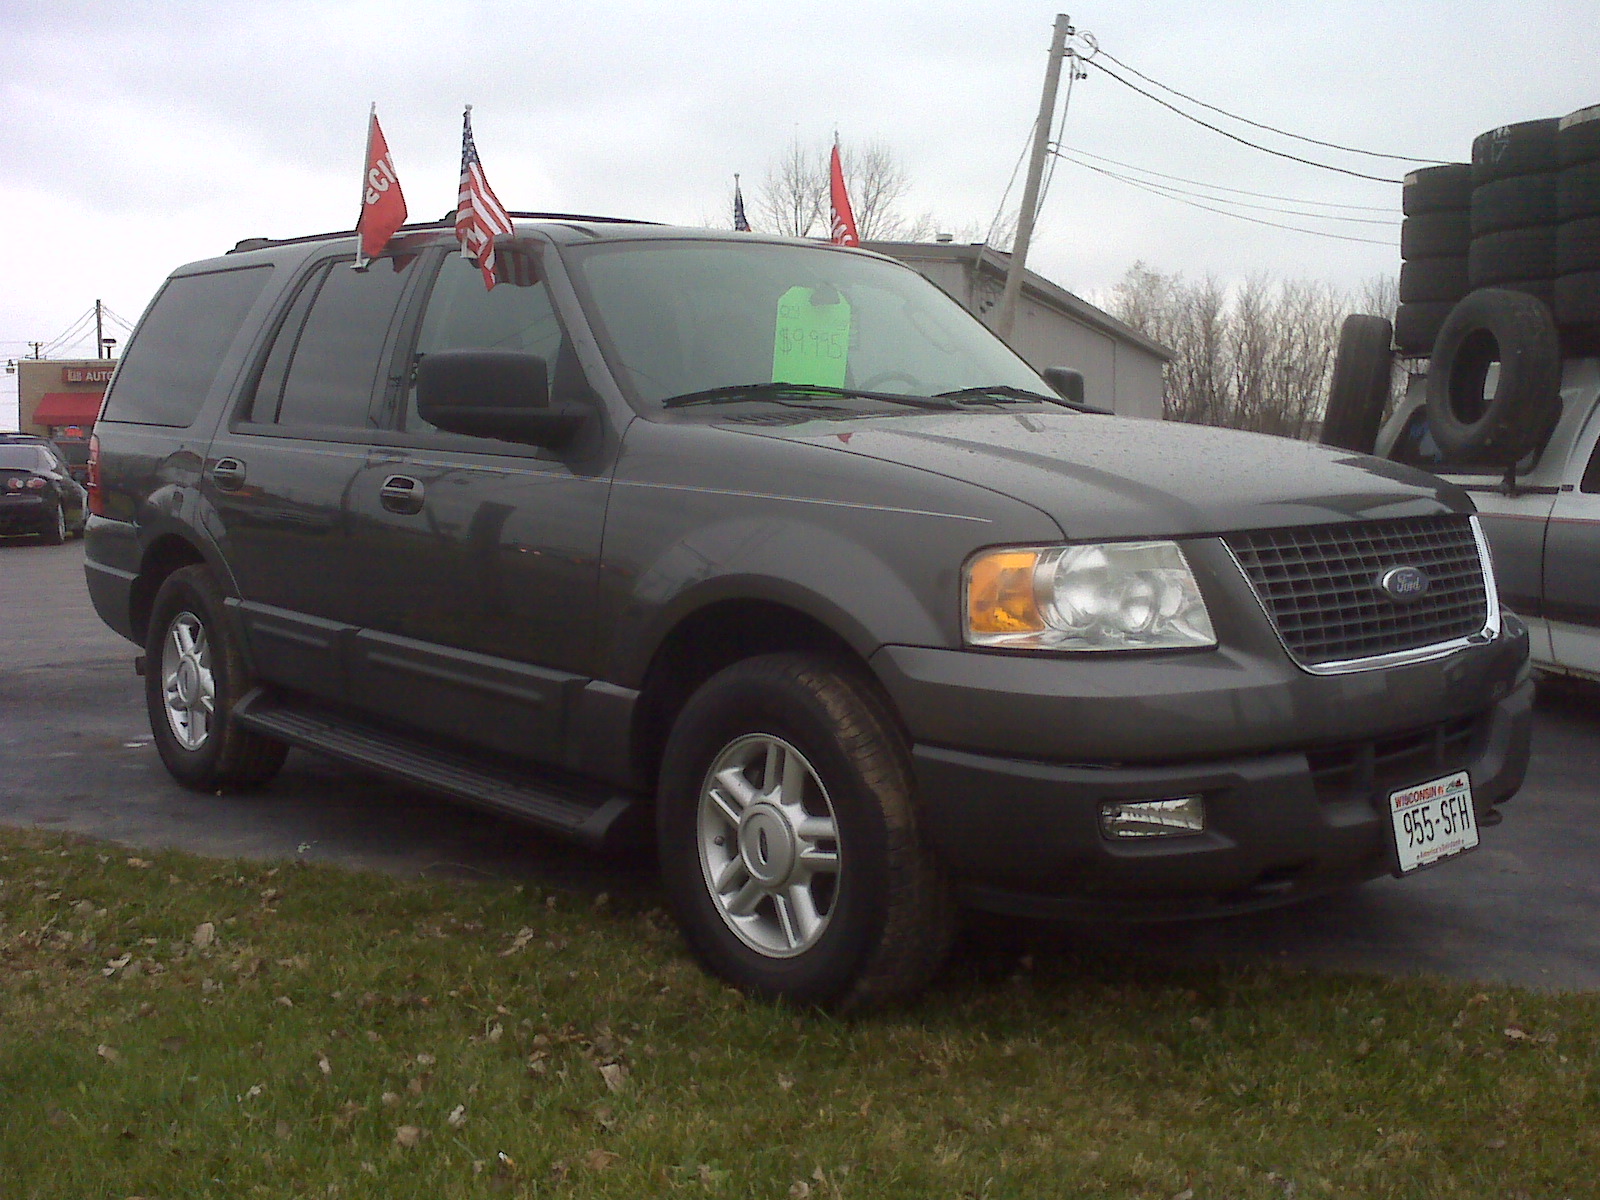 2004 Ford expedition xls review #6